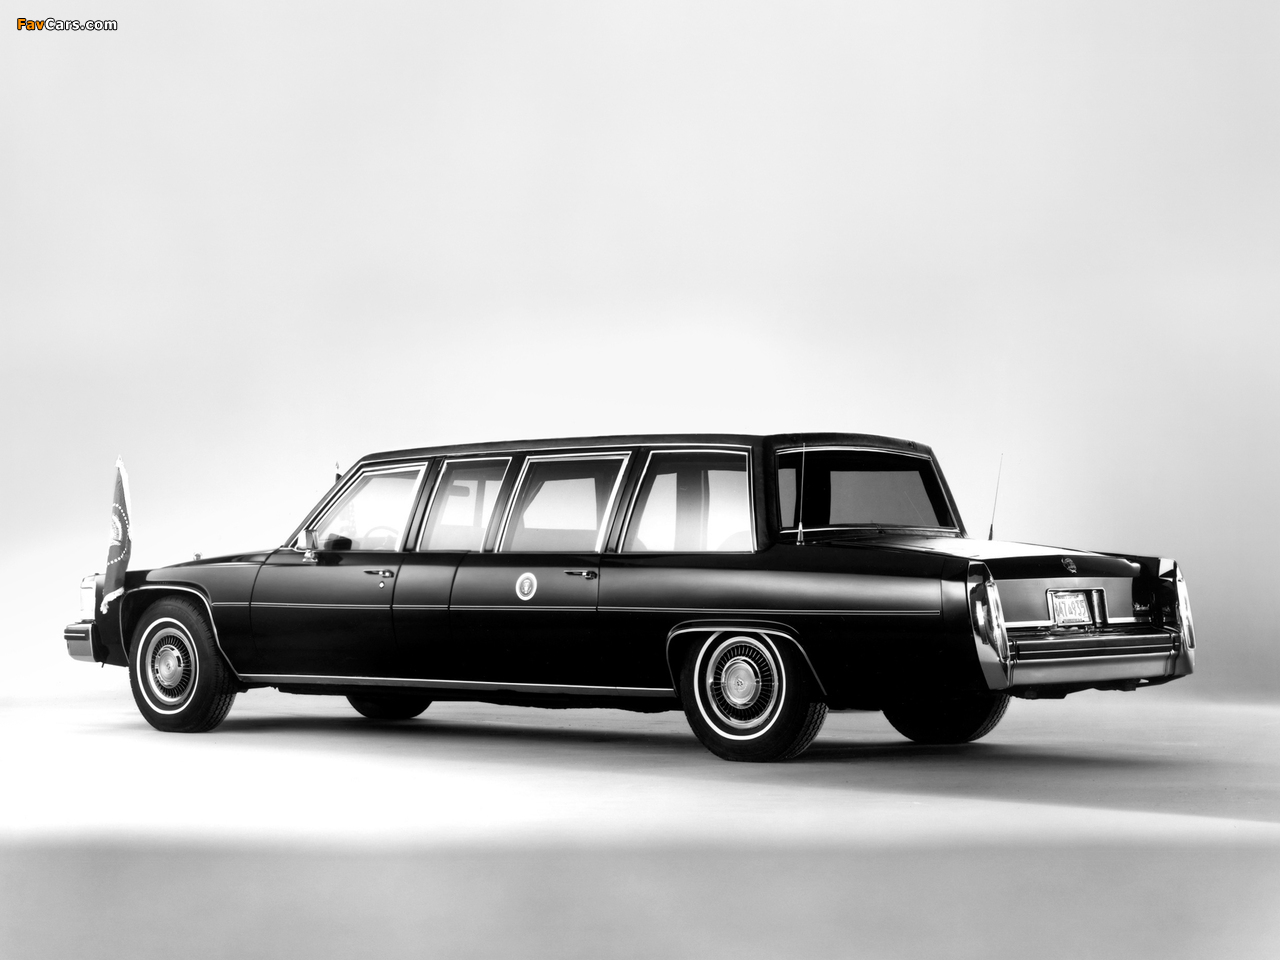 Images of Cadillac Fleetwood Presidential Limousine 1983 (1280 x 960)